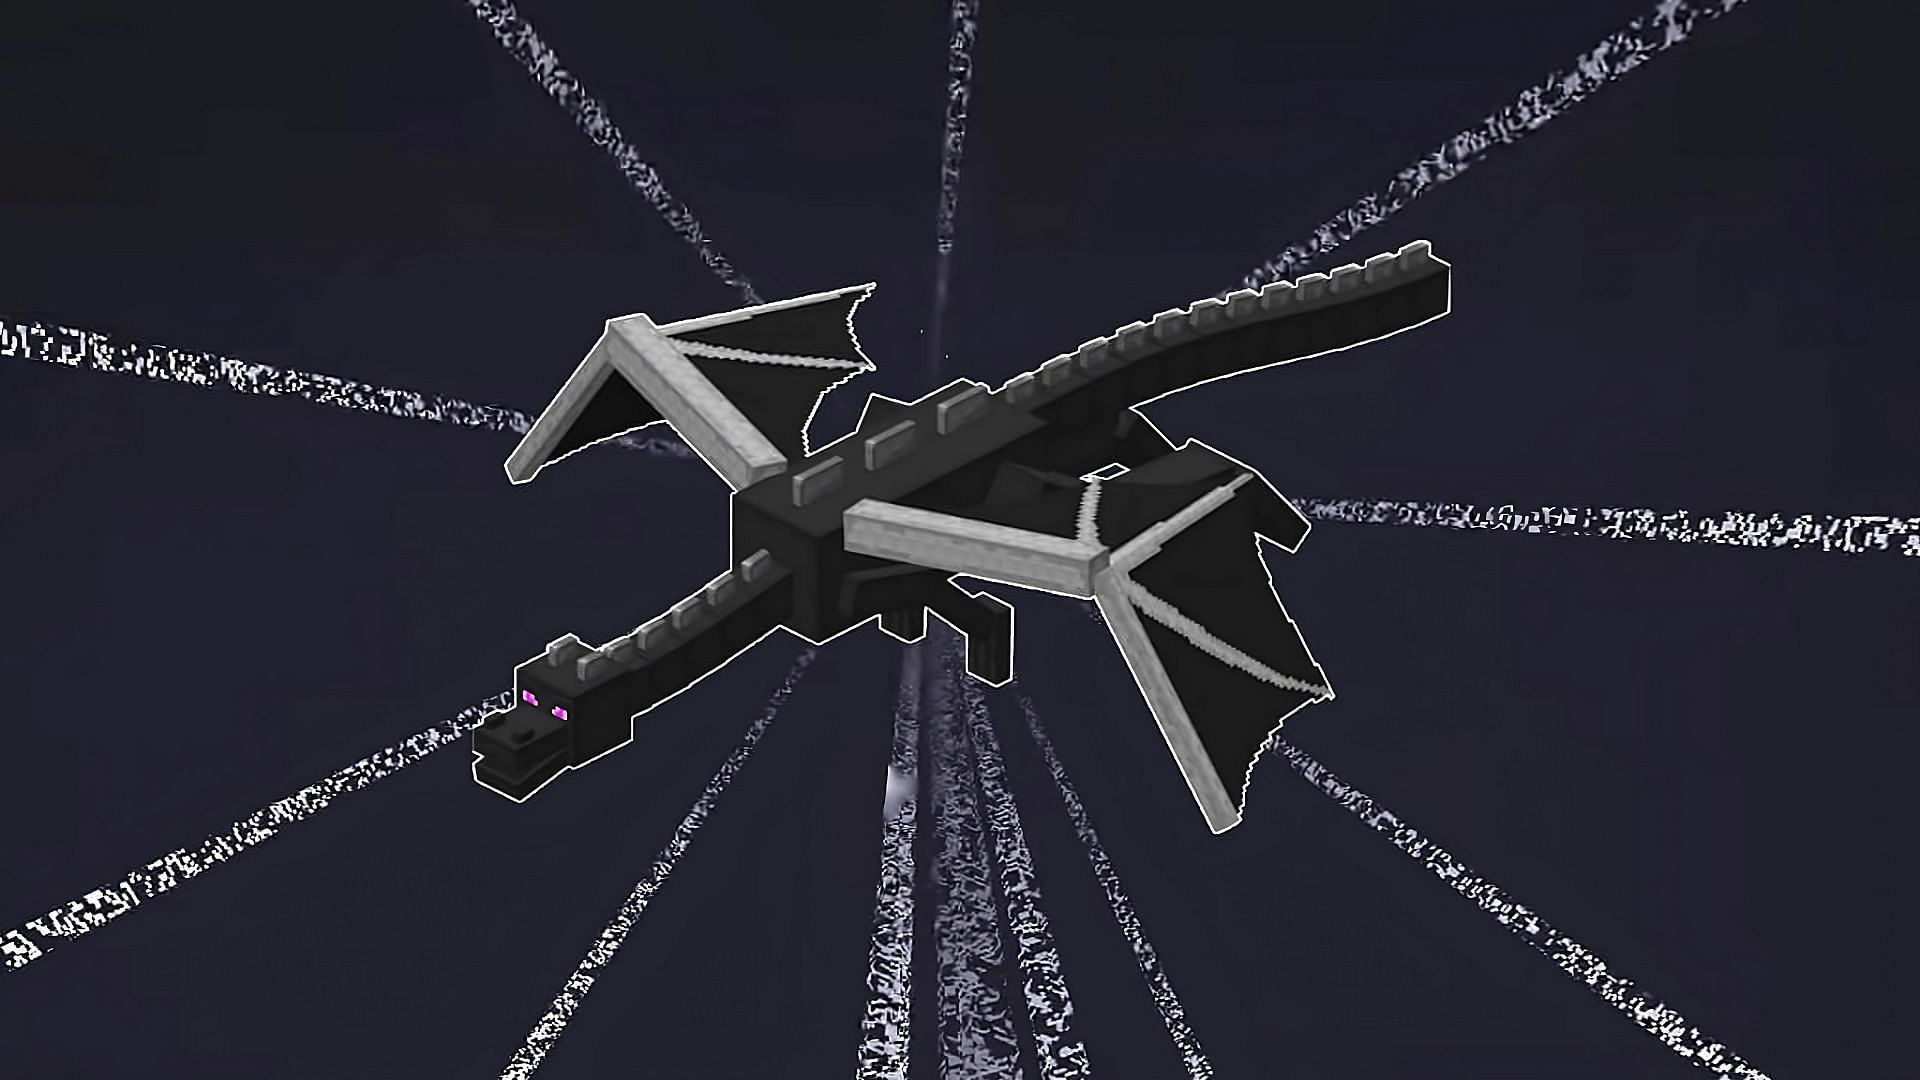 Minecraft players have devised plenty of ways to defeat the Ender Dragon that are quite unorthodox (Image via Mojang)